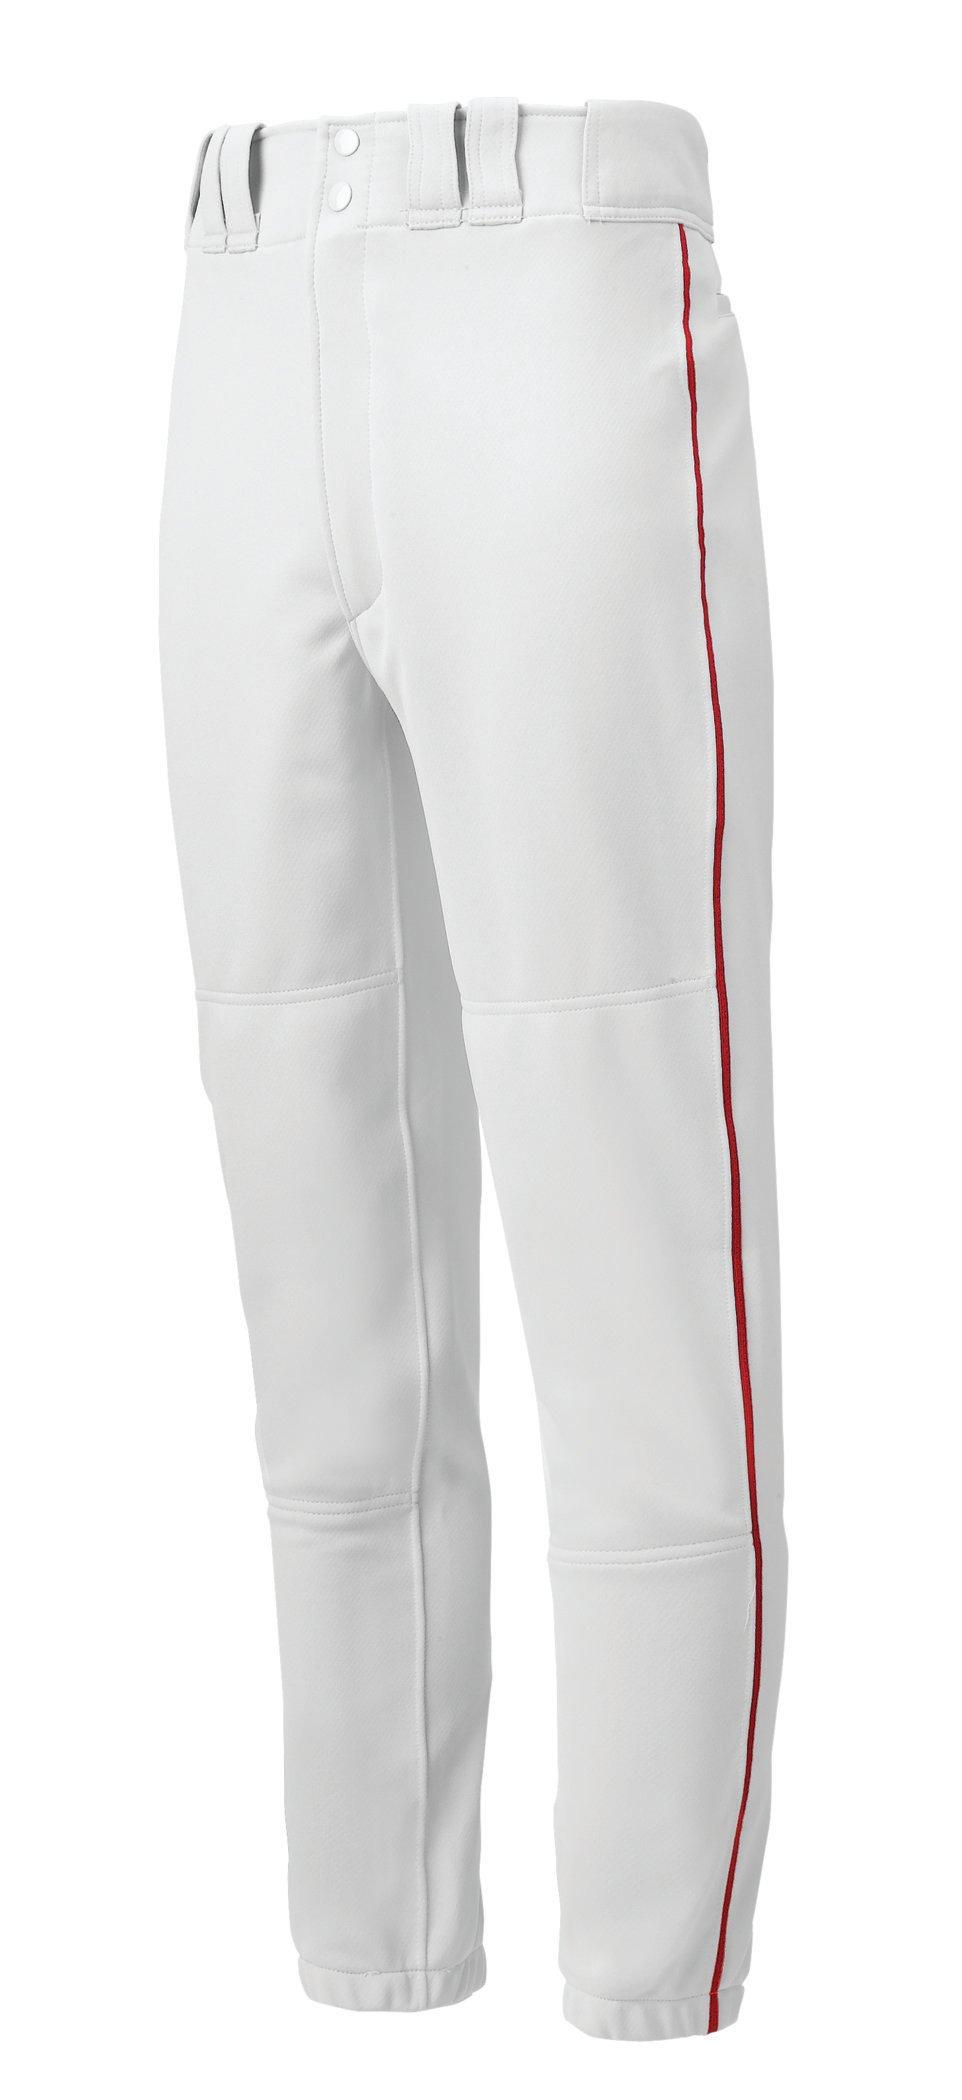 Details about   Mizuno 350210 Adult Premier Piped Baseball Pant NWT Red Various Sizes BB005